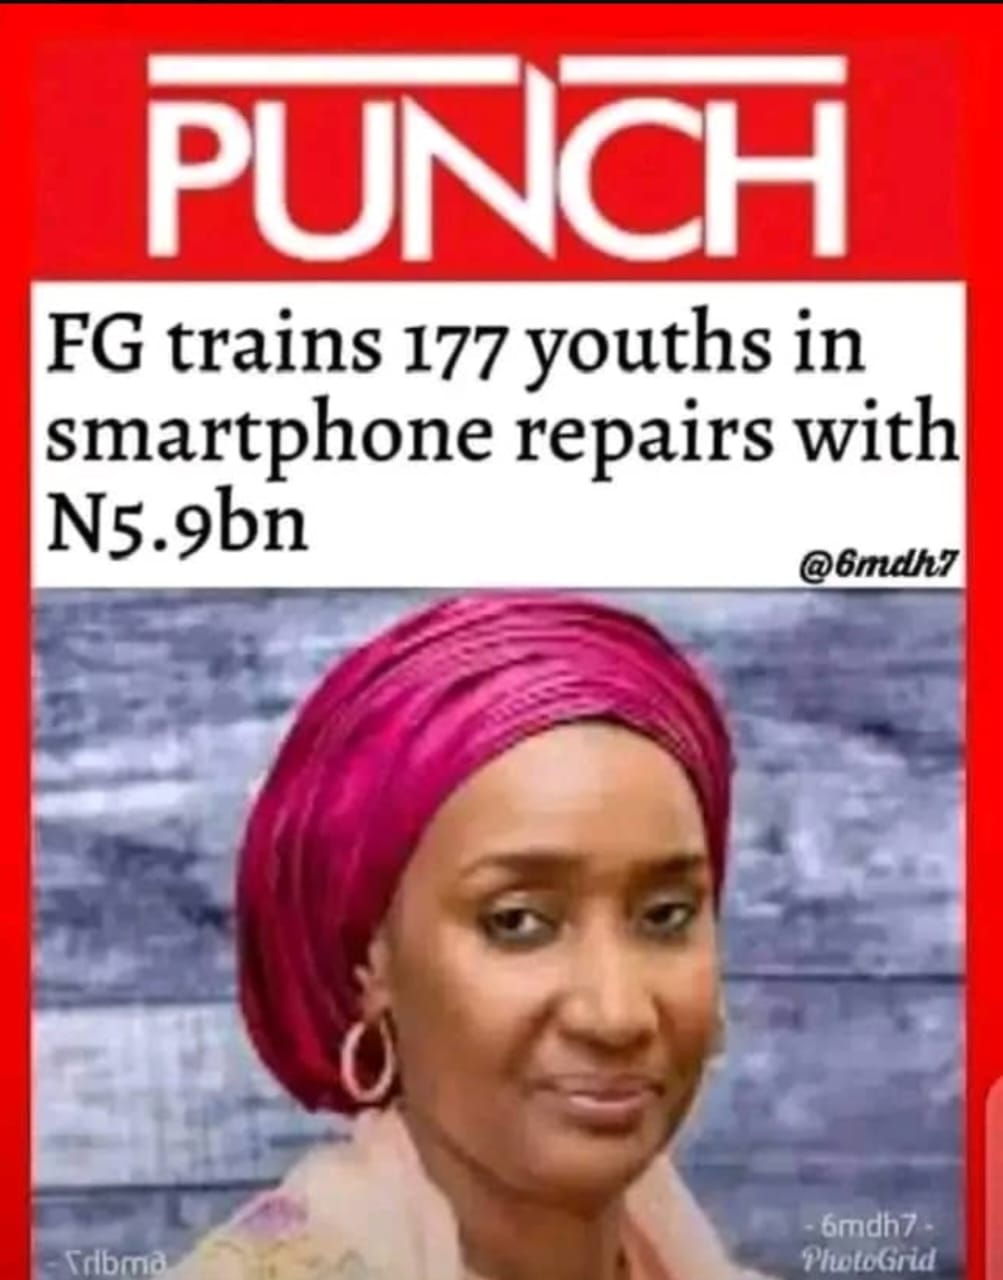 FG spent N5.9 billion to train only 177 youths